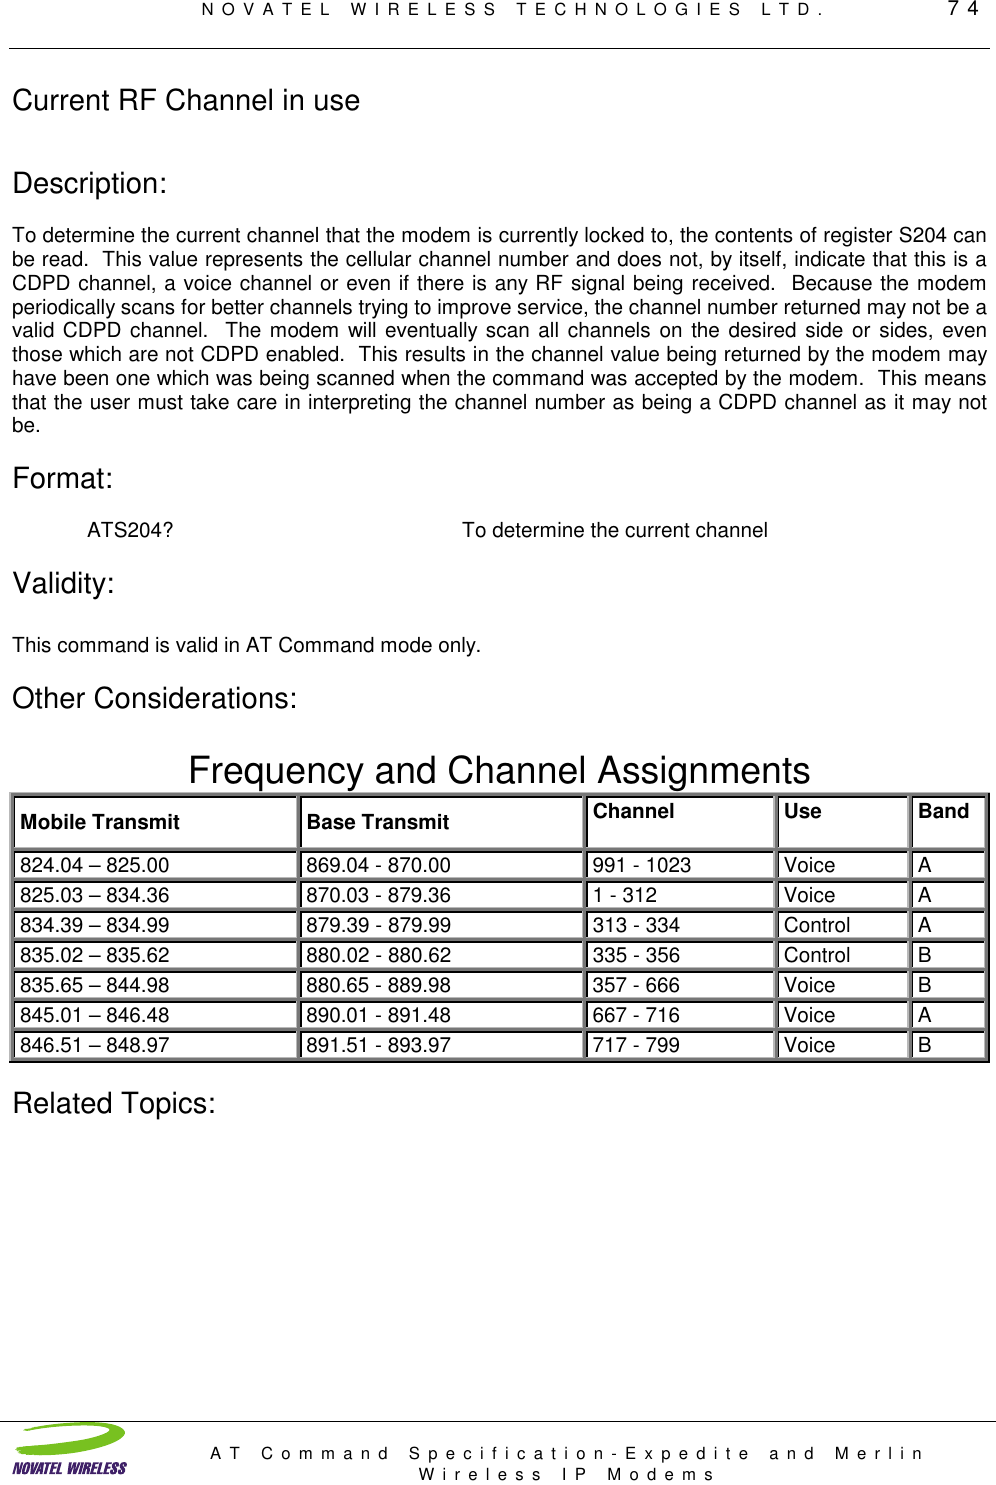 NOVATEL WIRELESS TECHNOLOGIES LTD.         74AT Command Specification-Expedite and MerlinWireless IP ModemsCurrent RF Channel in useDescription:To determine the current channel that the modem is currently locked to, the contents of register S204 canbe read.  This value represents the cellular channel number and does not, by itself, indicate that this is aCDPD channel, a voice channel or even if there is any RF signal being received.  Because the modemperiodically scans for better channels trying to improve service, the channel number returned may not be avalid CDPD channel.  The modem will eventually scan all channels on the desired side or sides, eventhose which are not CDPD enabled.  This results in the channel value being returned by the modem mayhave been one which was being scanned when the command was accepted by the modem.  This meansthat the user must take care in interpreting the channel number as being a CDPD channel as it may notbe.Format:ATS204? To determine the current channel Validity:This command is valid in AT Command mode only.Other Considerations:Frequency and Channel AssignmentsMobile Transmit Base Transmit Channel Use Band824.04 – 825.00 869.04 - 870.00 991 - 1023 Voice A825.03 – 834.36 870.03 - 879.36 1 - 312 Voice A834.39 – 834.99 879.39 - 879.99 313 - 334 Control A835.02 – 835.62 880.02 - 880.62 335 - 356 Control B835.65 – 844.98 880.65 - 889.98 357 - 666 Voice B845.01 – 846.48 890.01 - 891.48 667 - 716 Voice A846.51 – 848.97 891.51 - 893.97 717 - 799 Voice BRelated Topics: